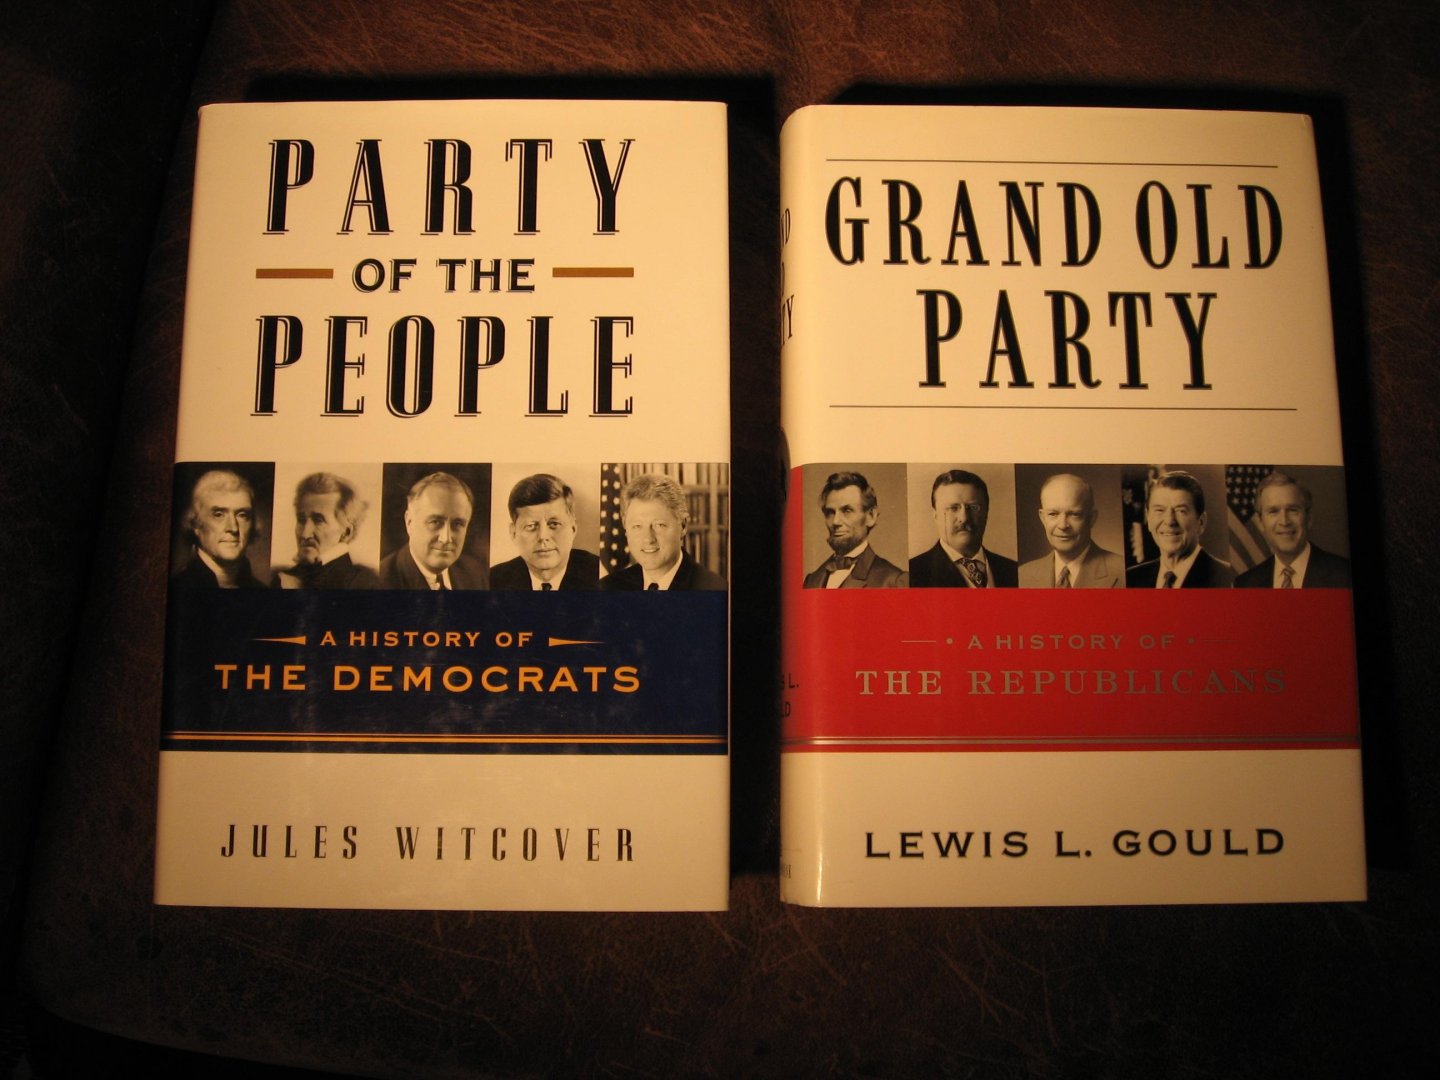 Witcover, J  +  Gould, L.L. - Party of the people  +  Grand old party.